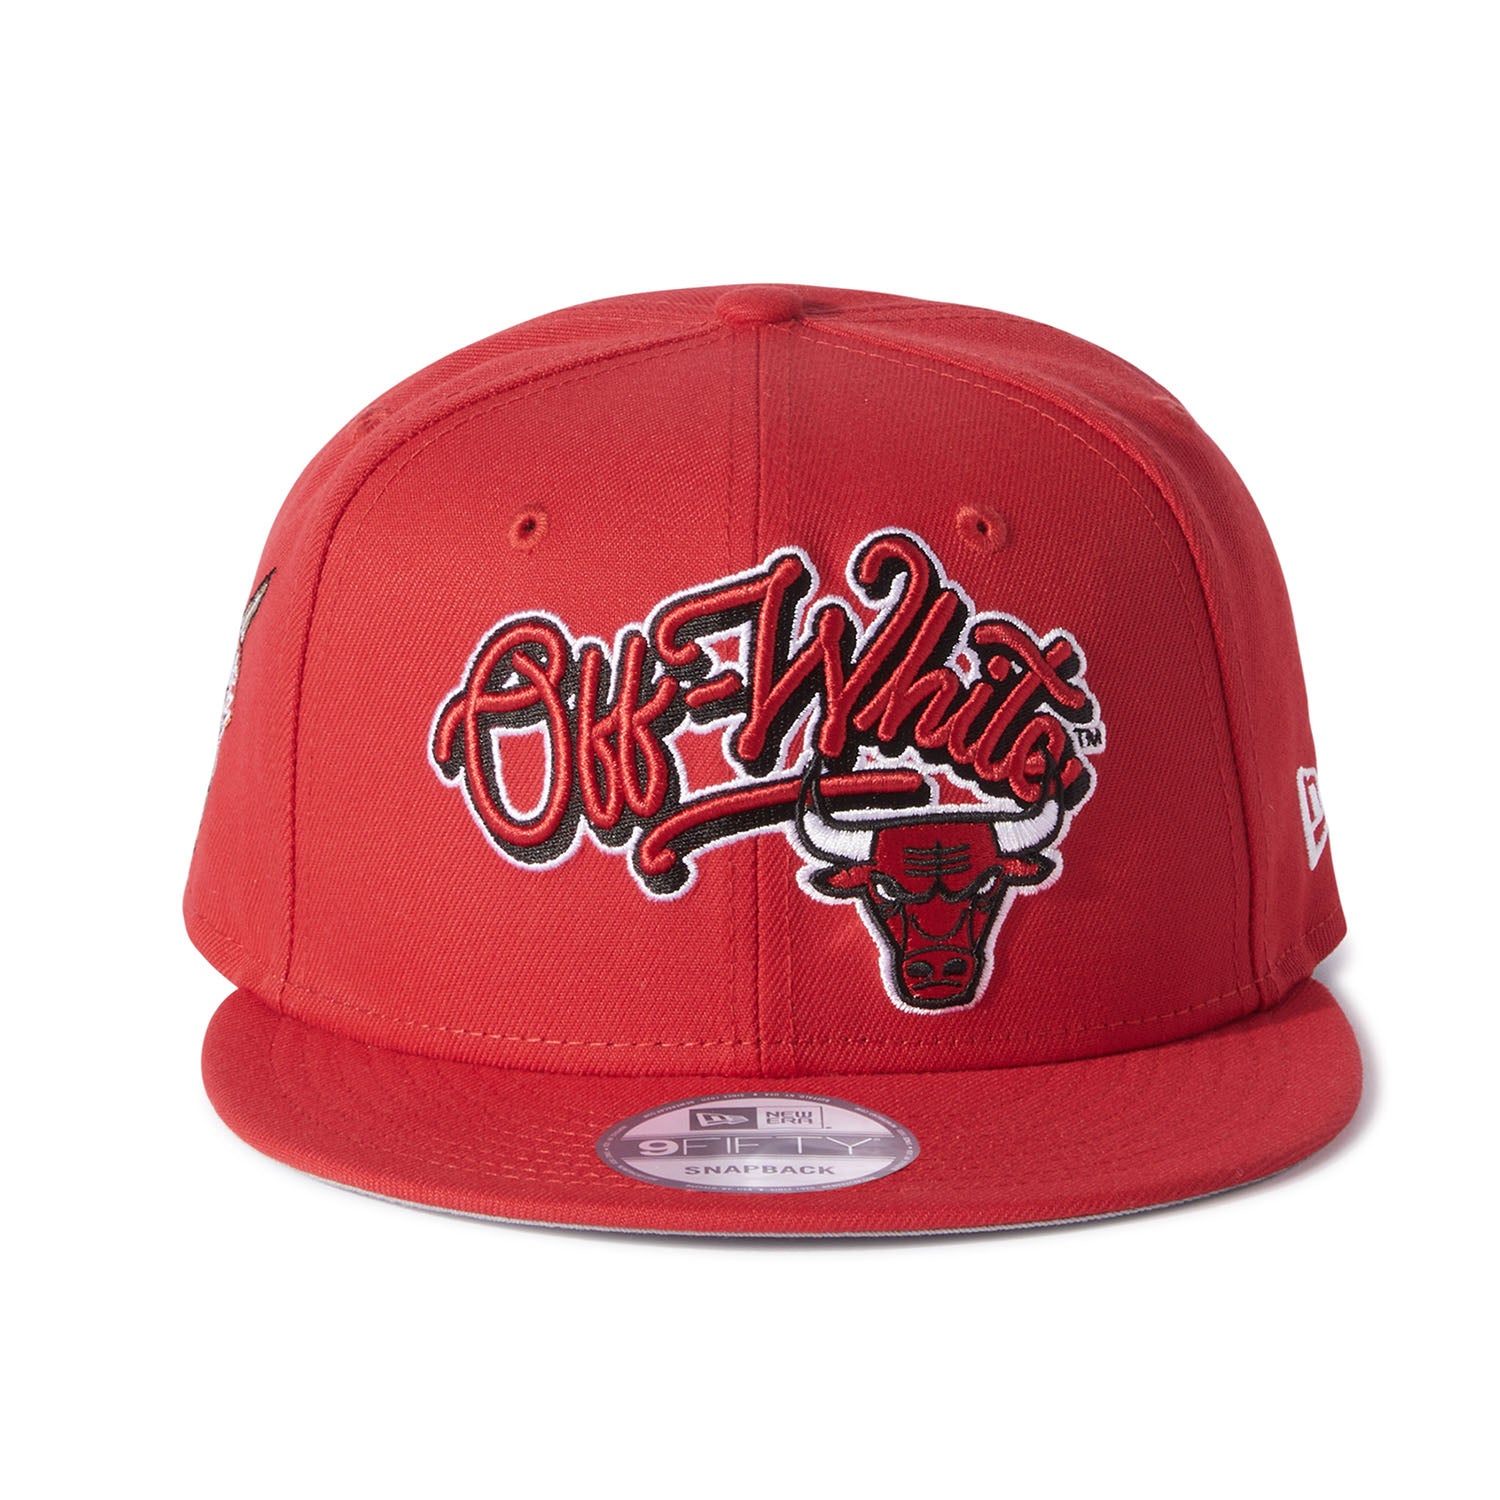 Chicago Bulls New Era Off-White Hat - Red - front view